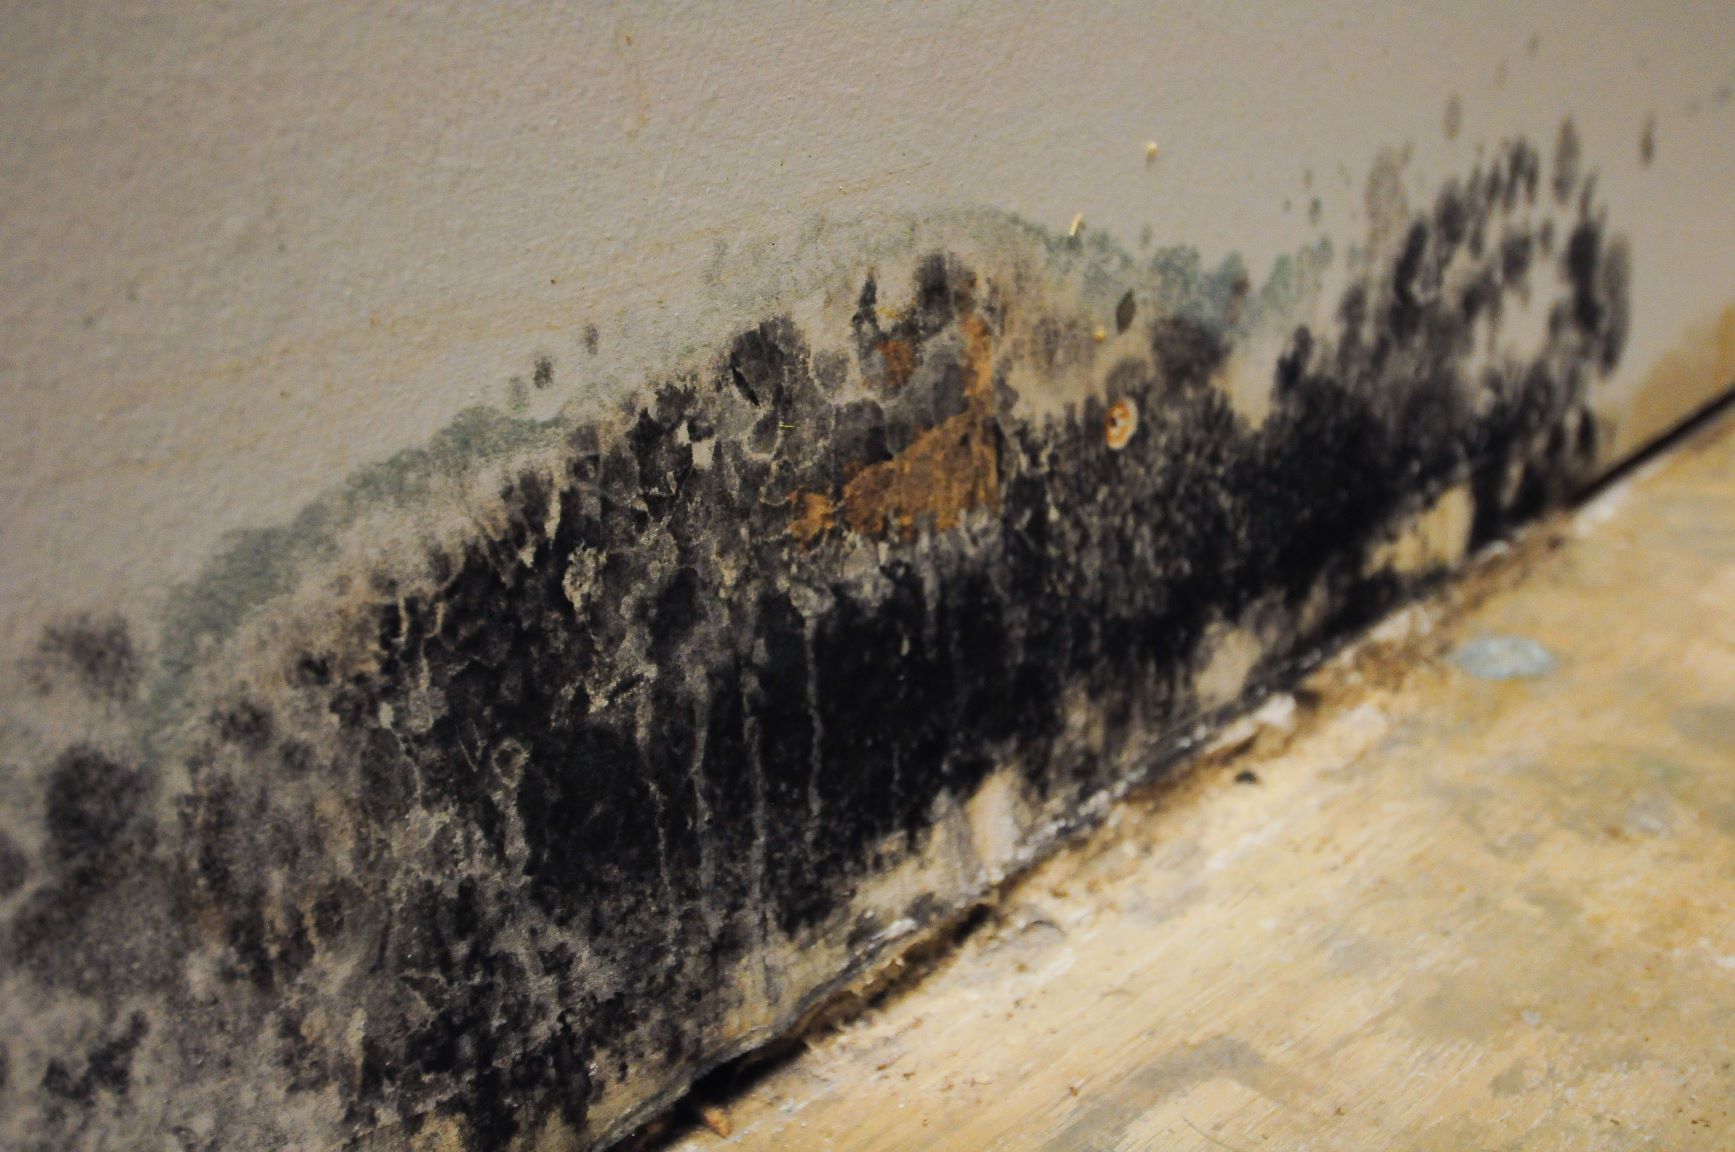 3 Reasons To Take Mold Seriously